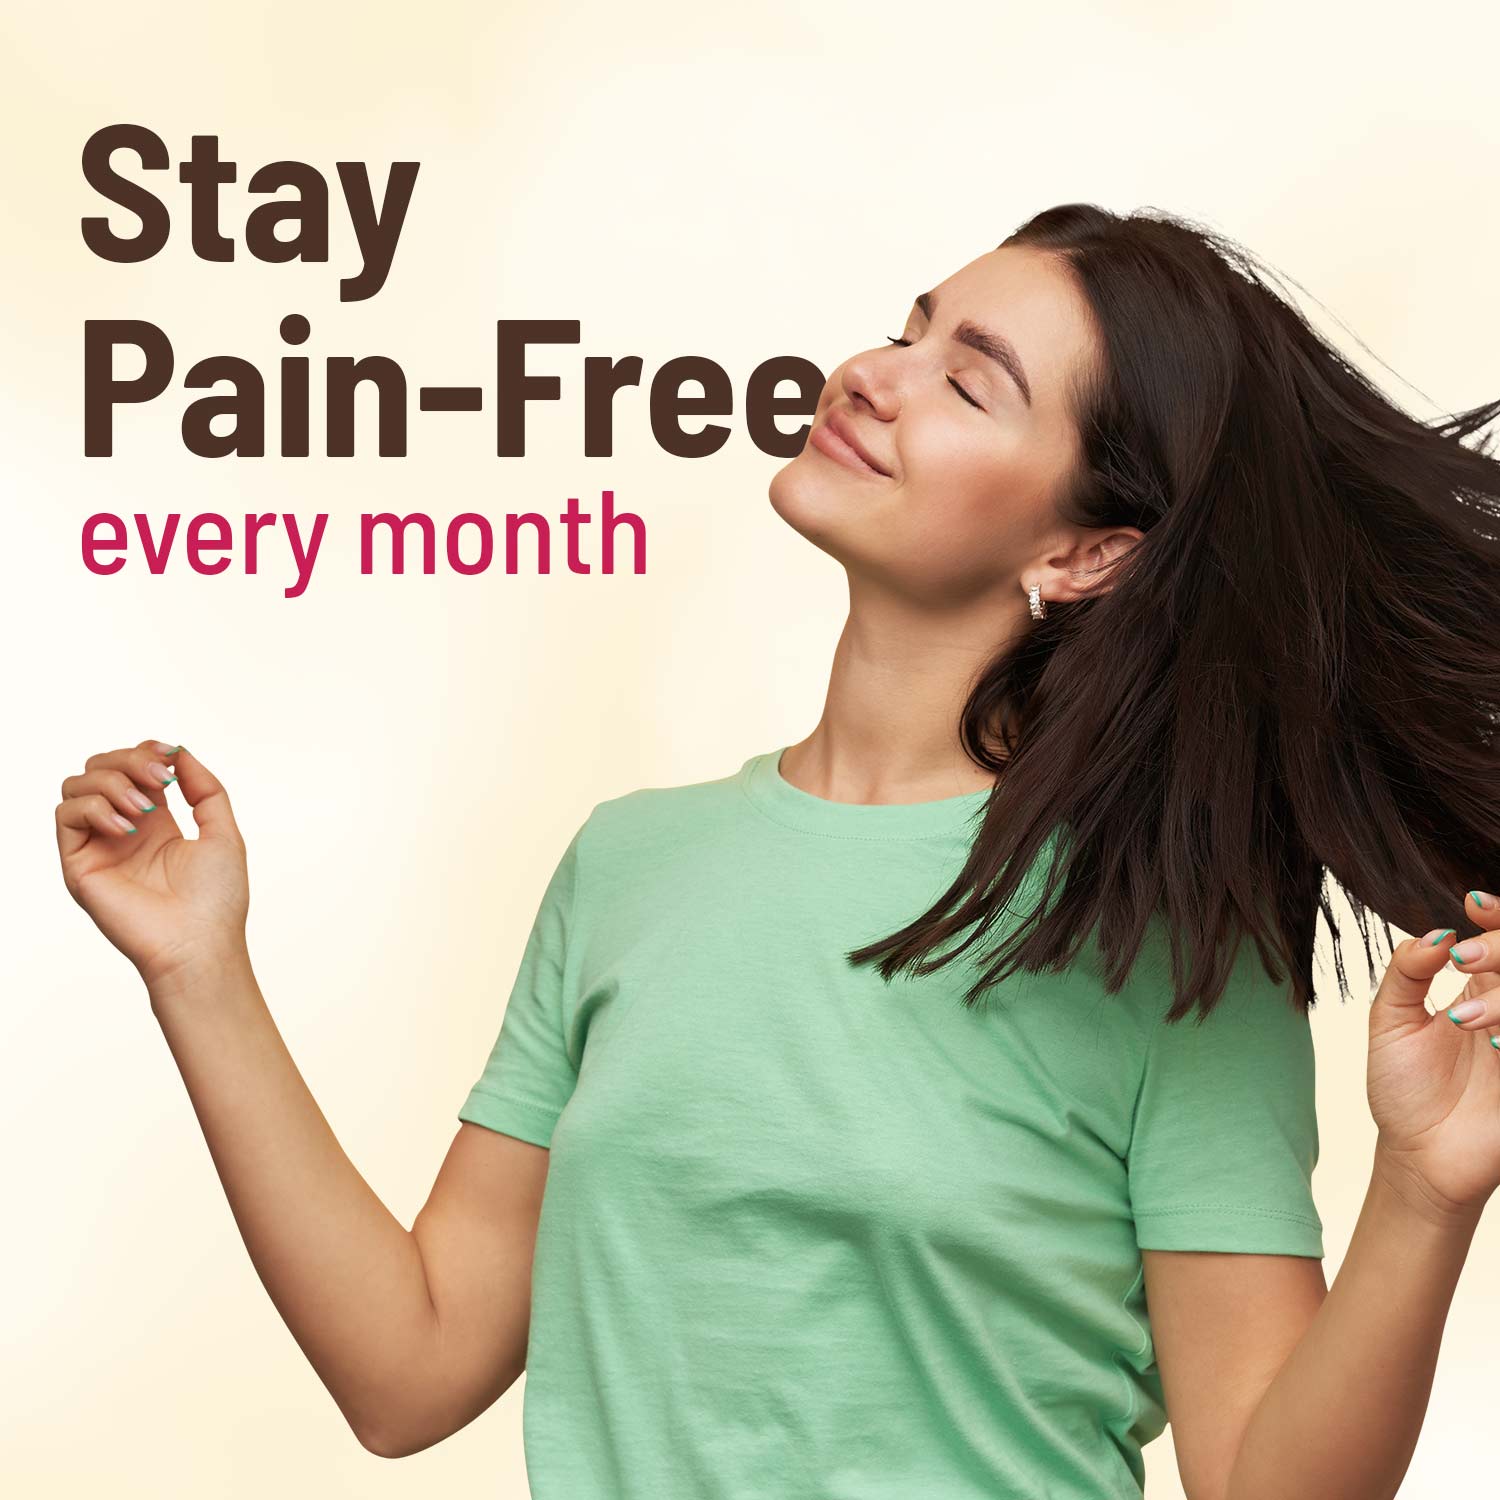 Fast pain relief during monthly cycles